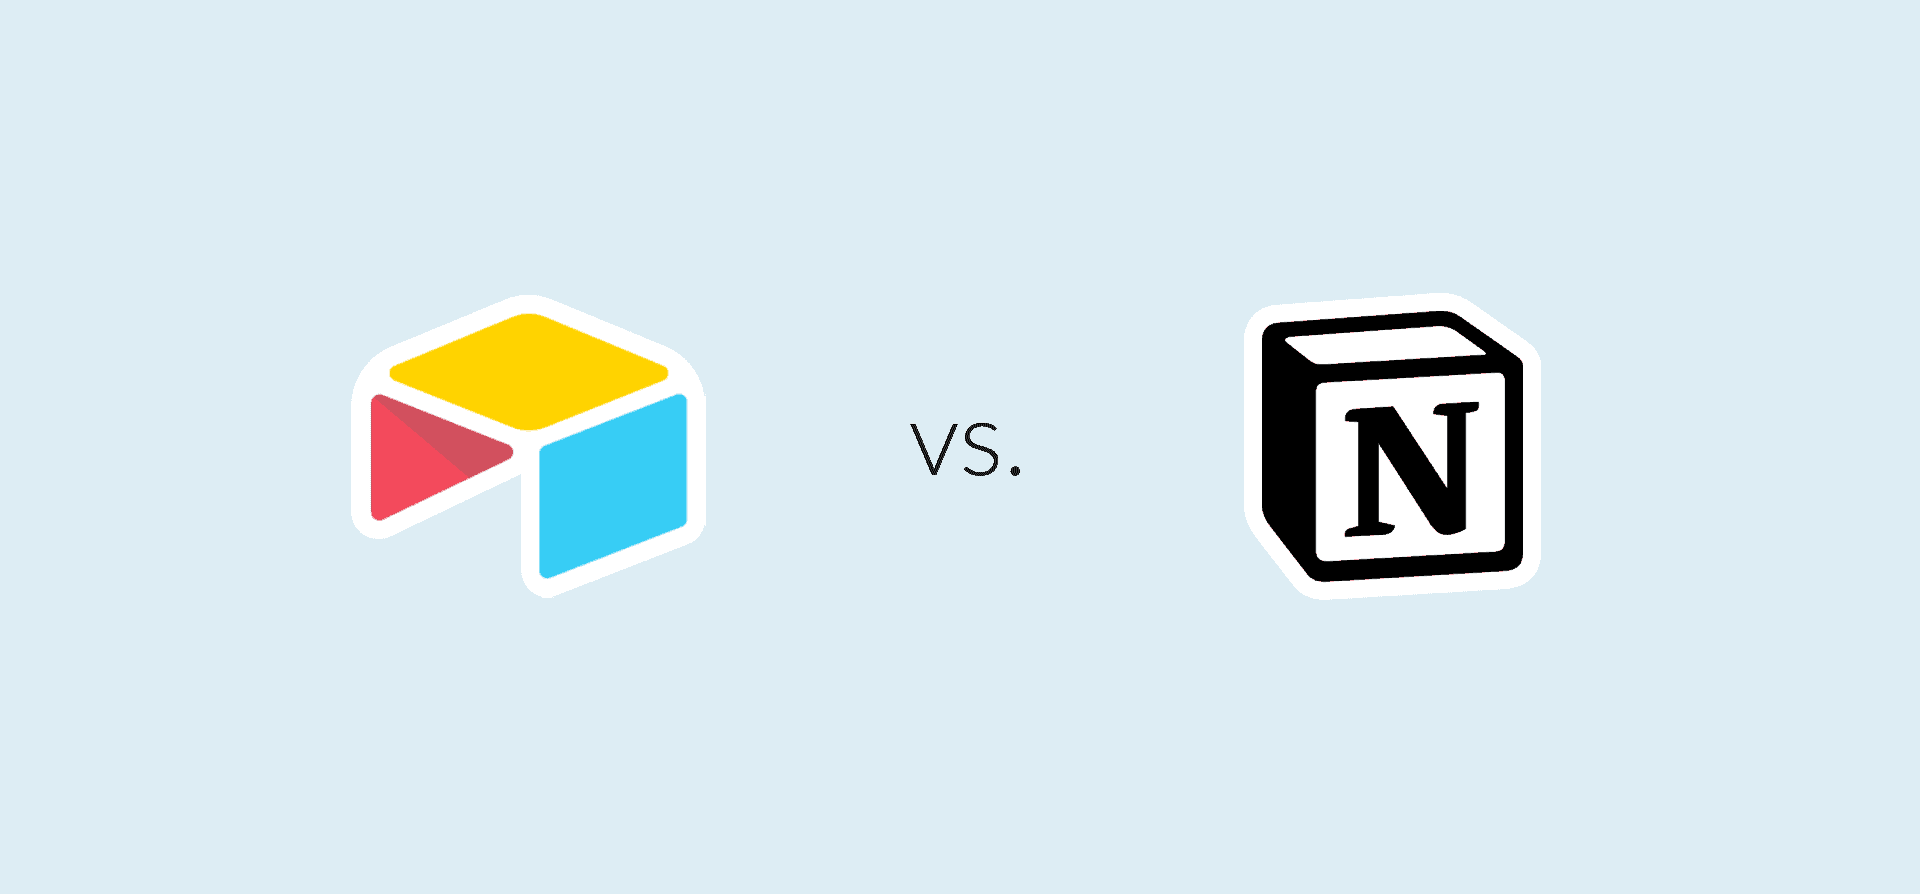 Logos for Airtable and Notion, representing a comparison of Airtable vs. Notion.